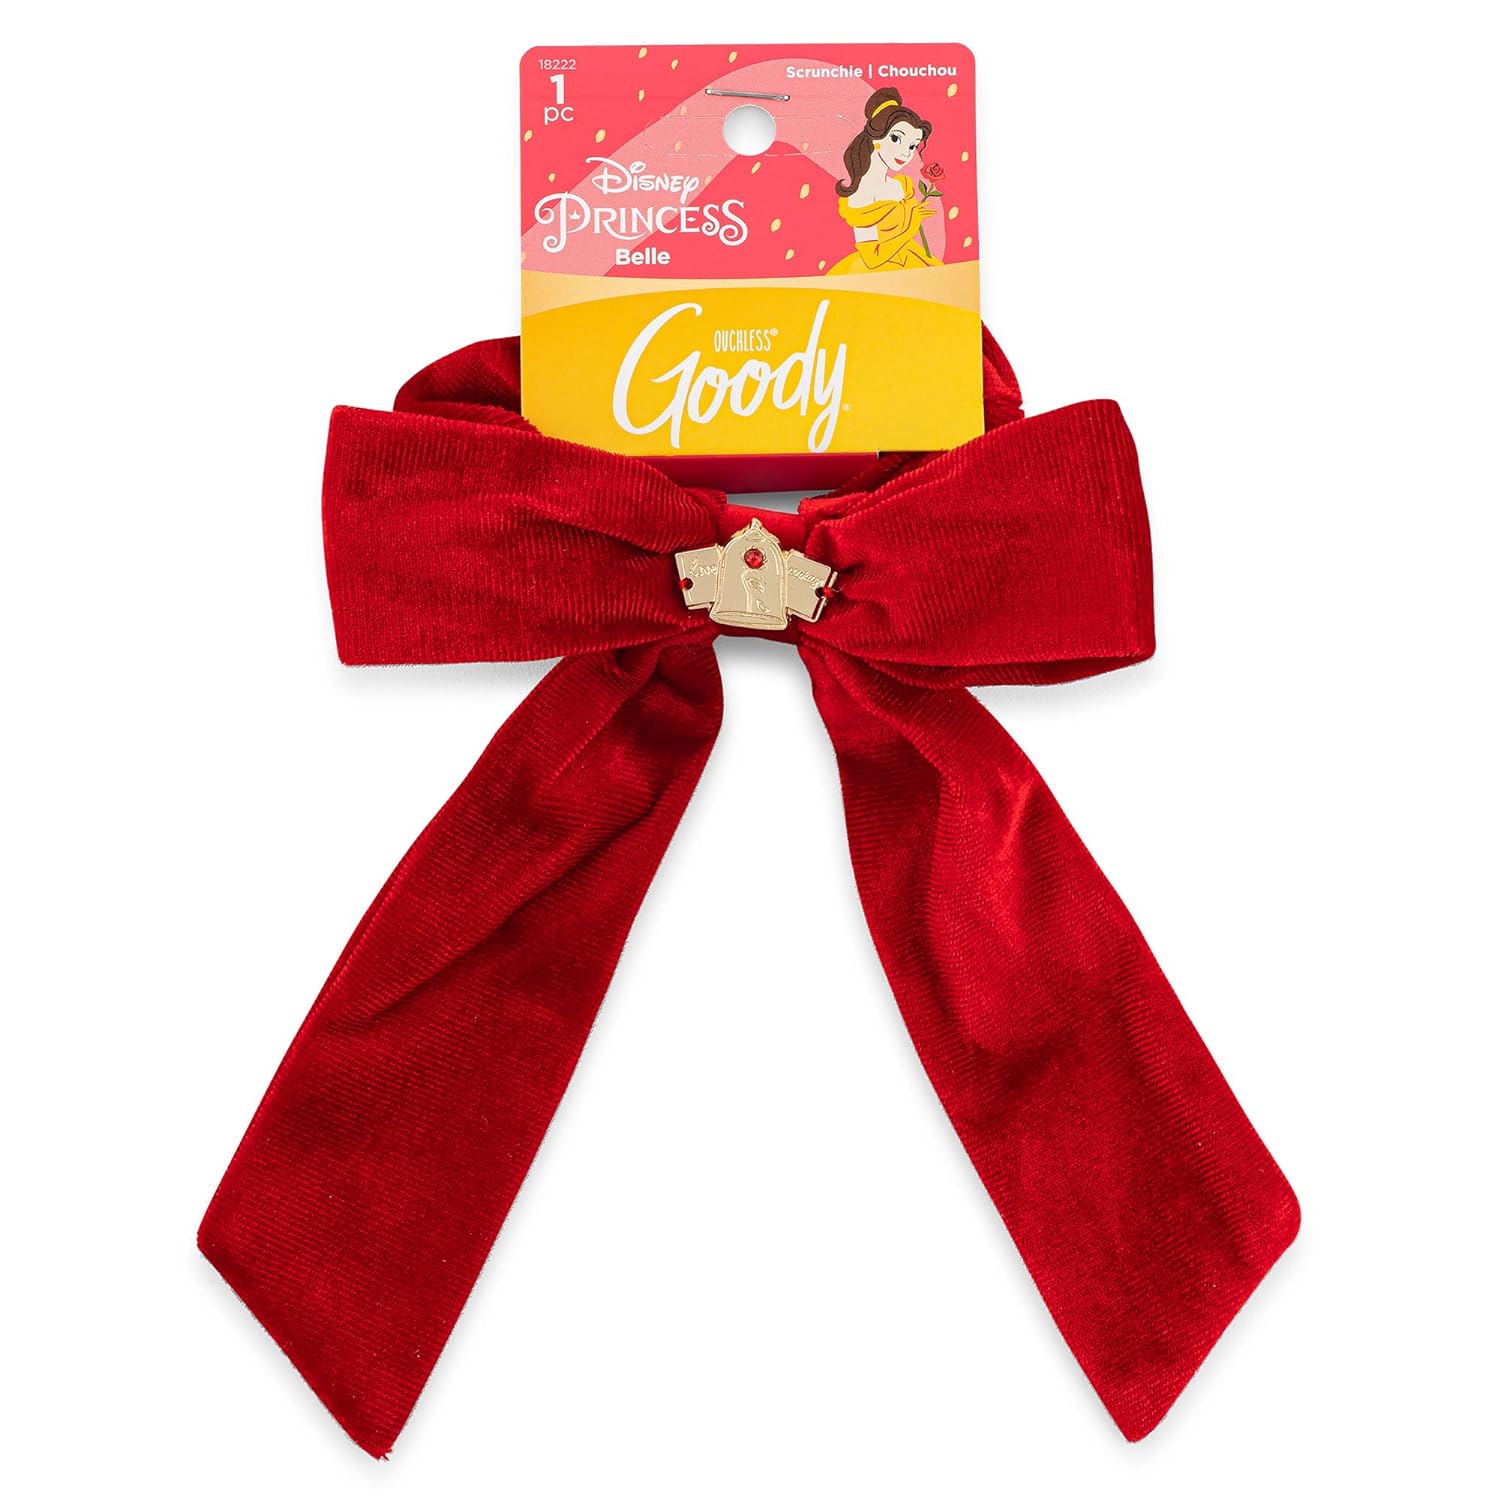 Goody Oucless Disney Princess Belle Bow Scrunchie UPC:041457182222 Pack:72/3